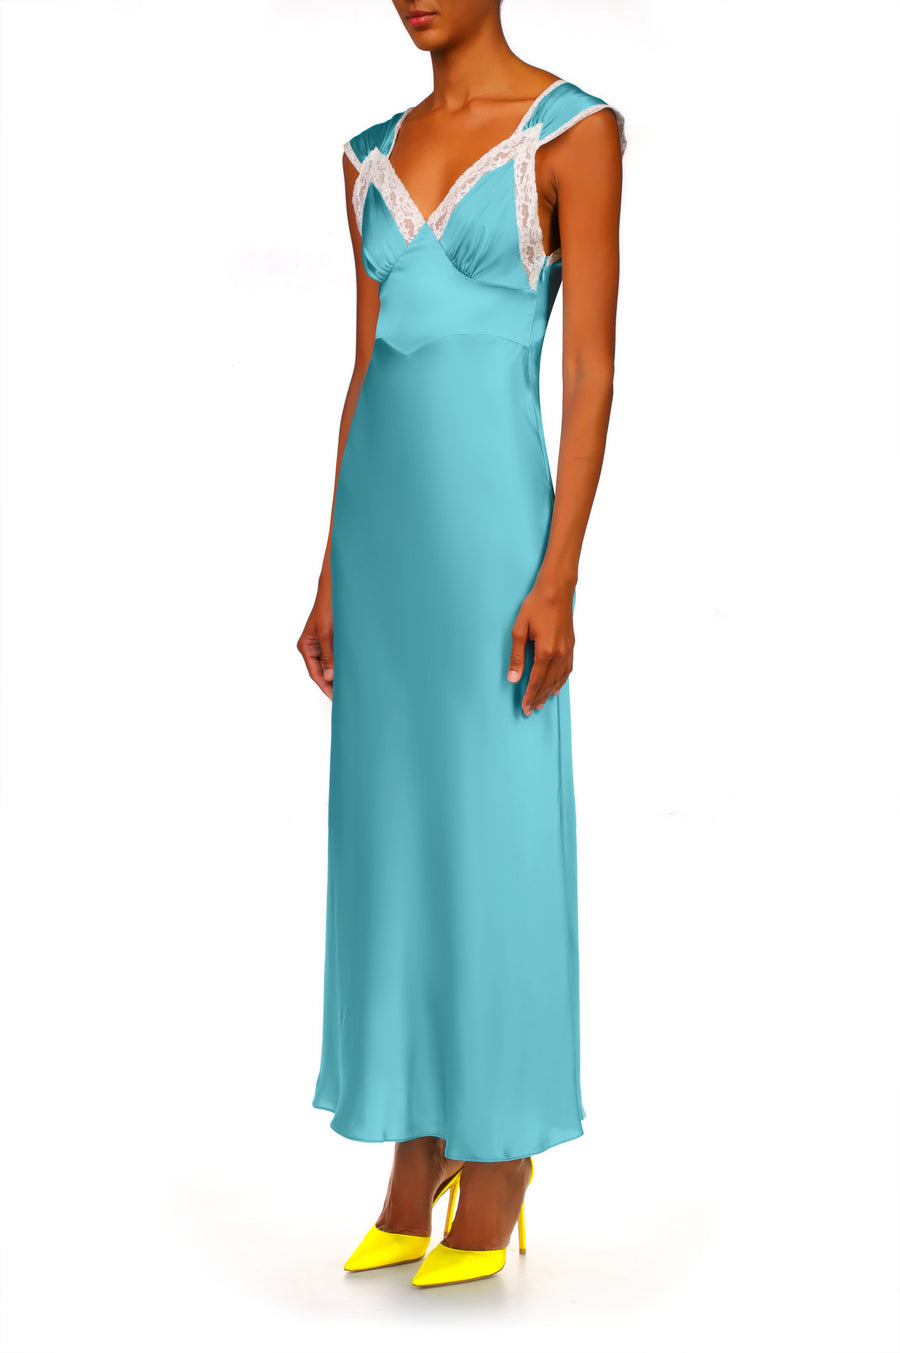 Blue Silk Satin Dress With Lace Details